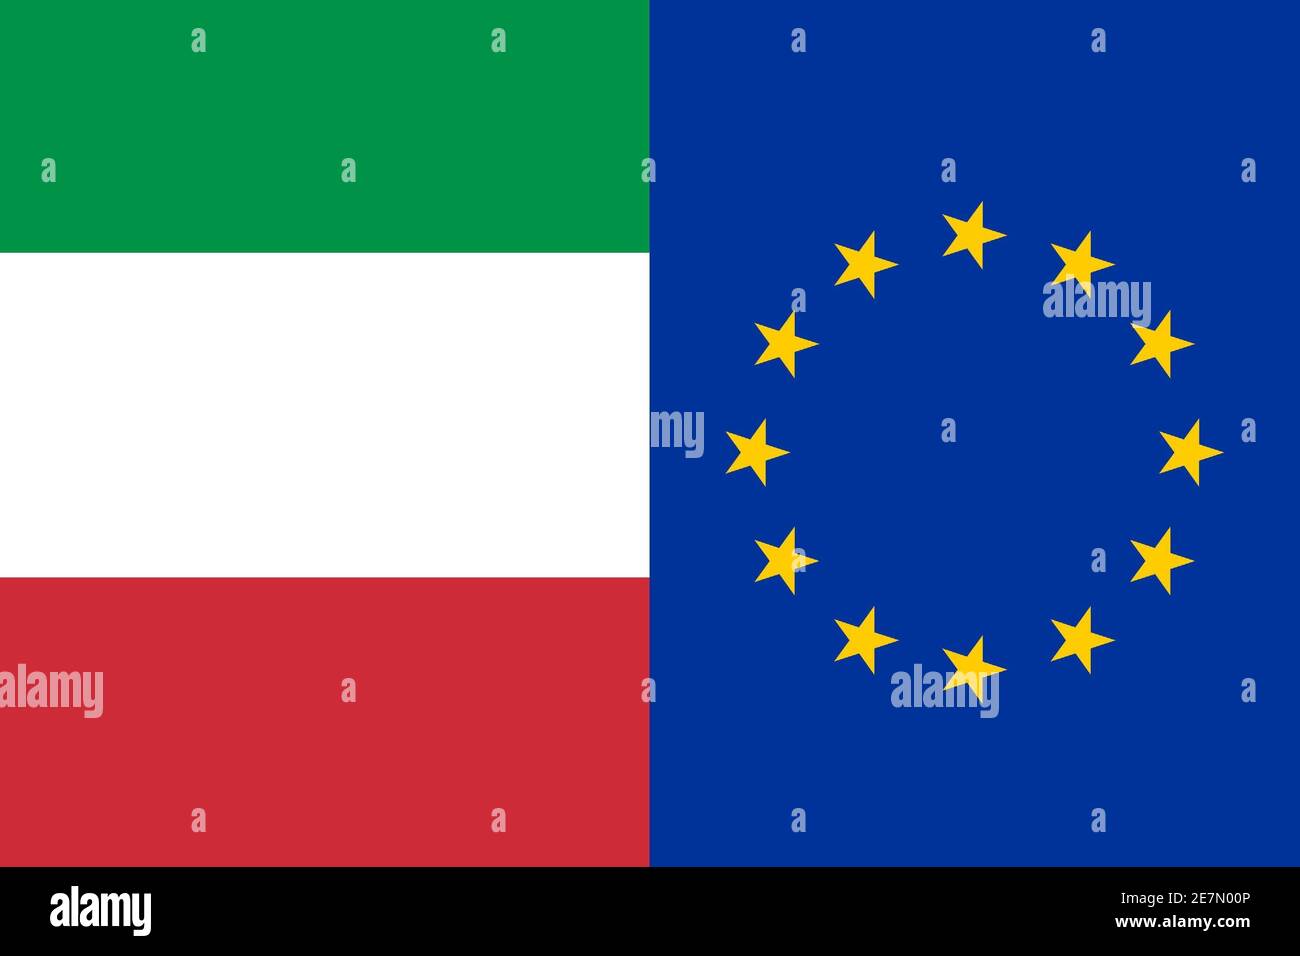 Illustration of the Flag of Italy and the EU next to each other Stock Photo